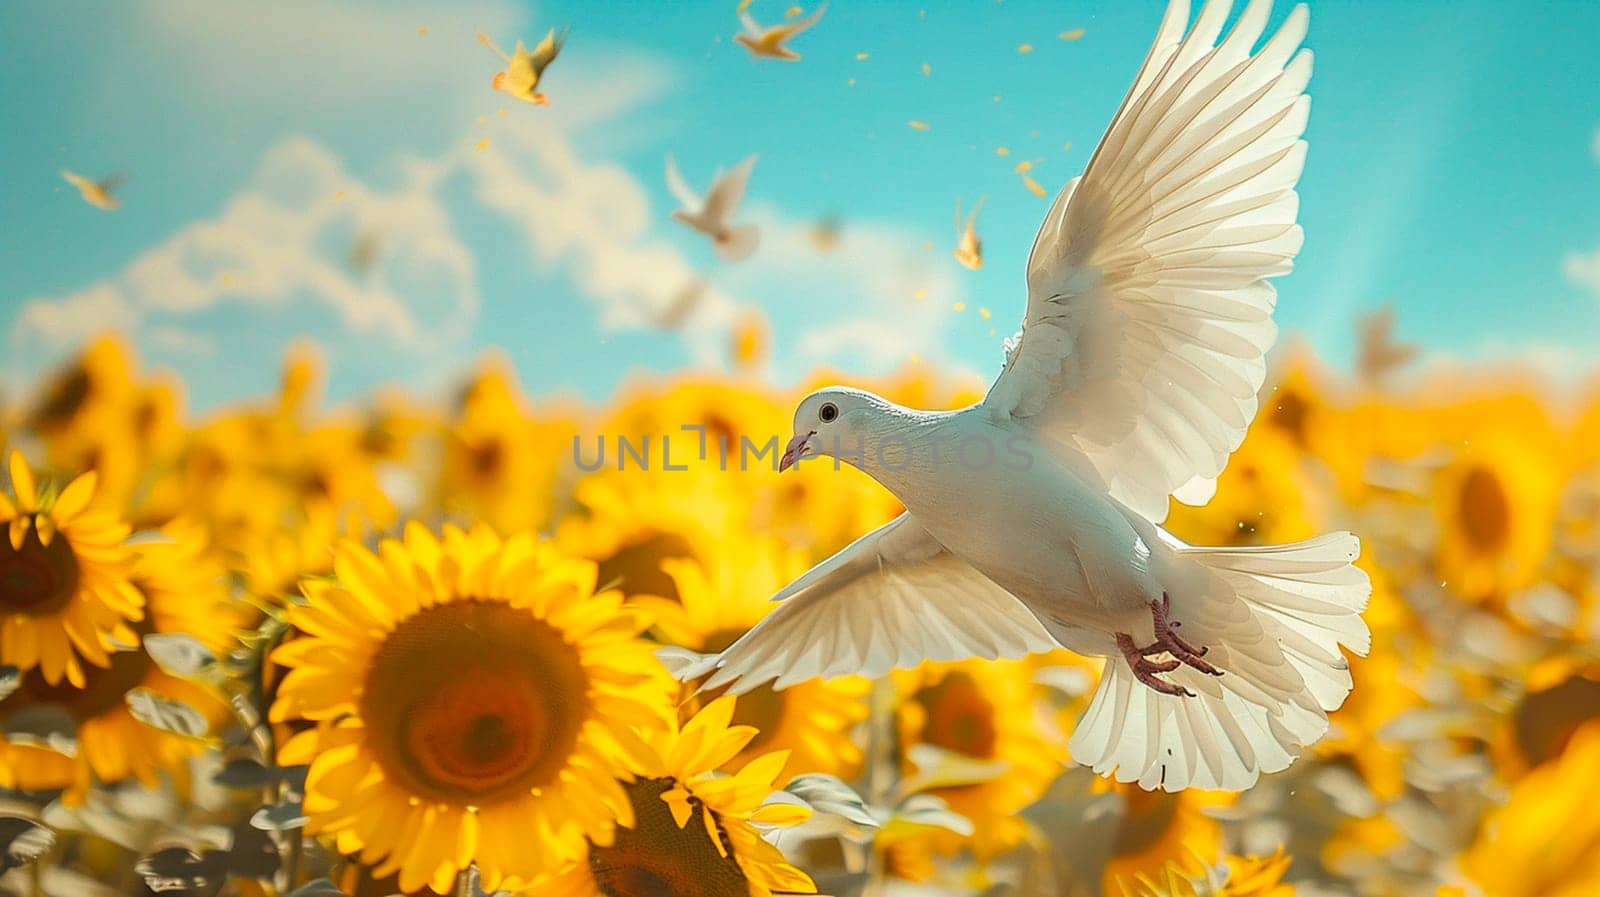 A white dove over a sunflower field in Ukraine. Selective focus. by yanadjana